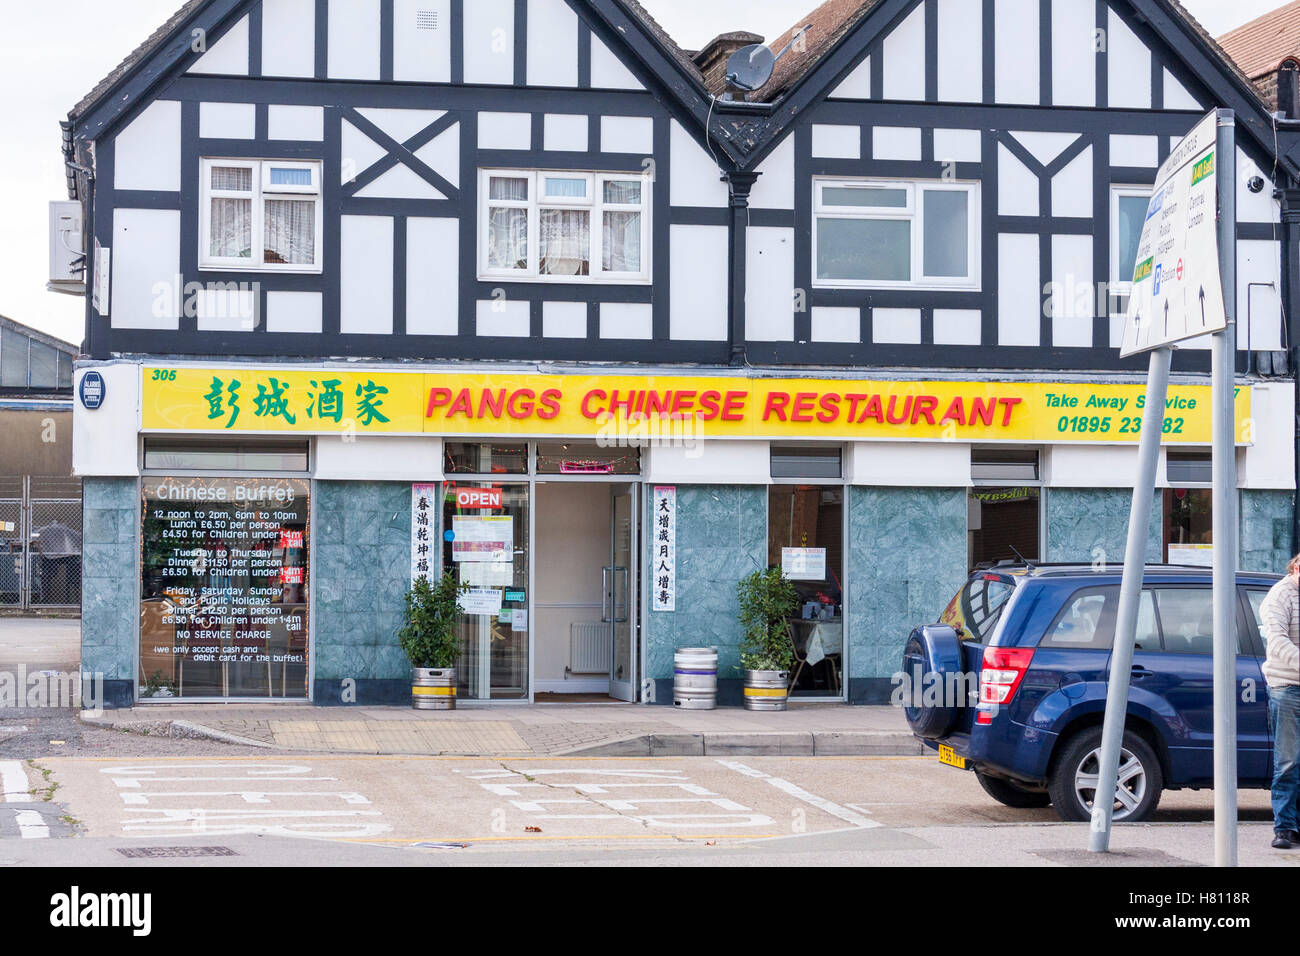 Pangs - All you can eat Chinese restaurant, Hillingdon Circus, Hillingdon, Greater London, UK Stock Photo